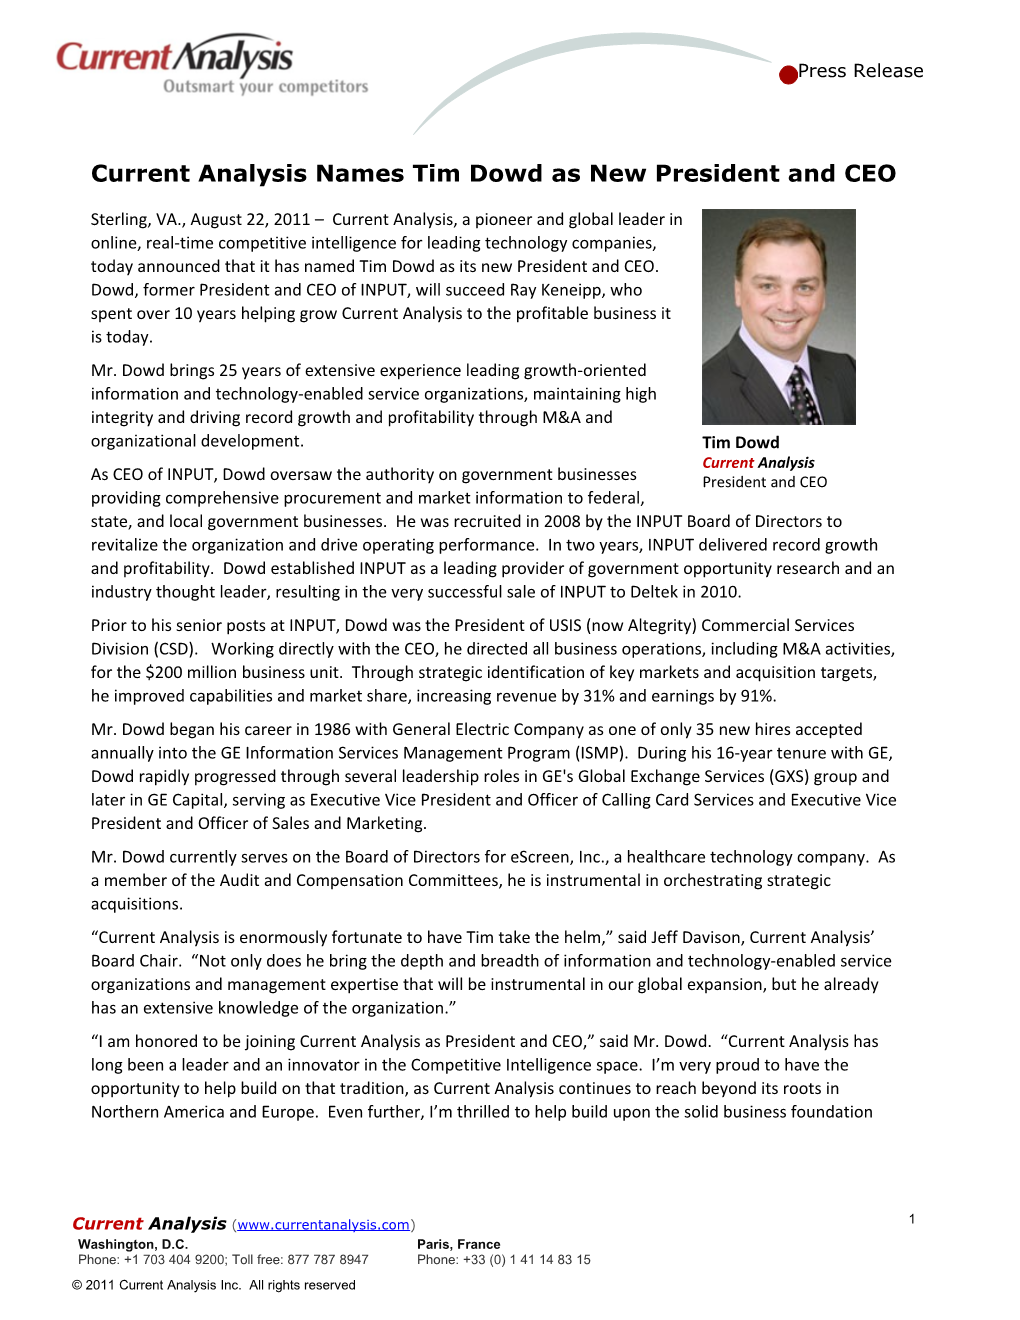 Current Analysis Names Tim Dowd As New President and CEO